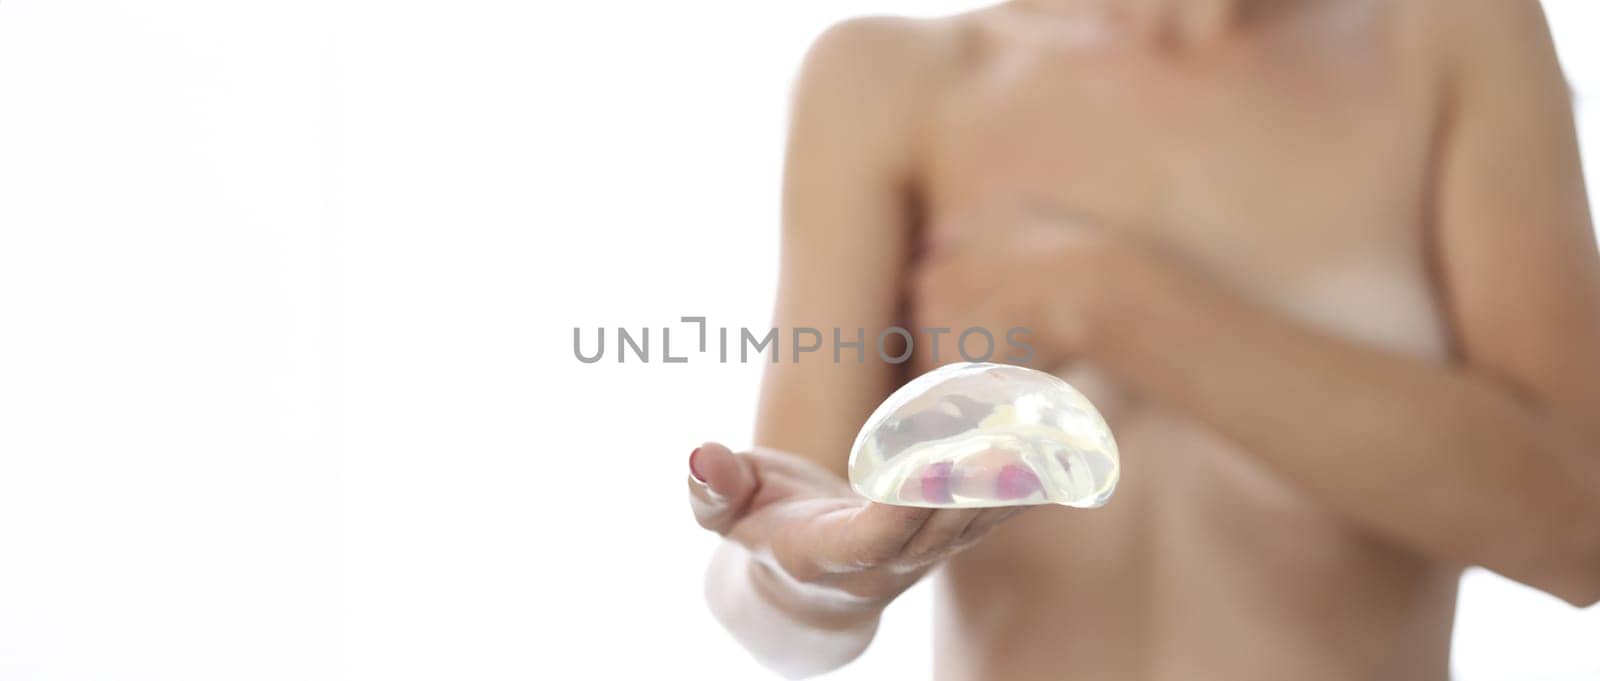 Woman holds silicone breast implant for breast augmentation by kuprevich